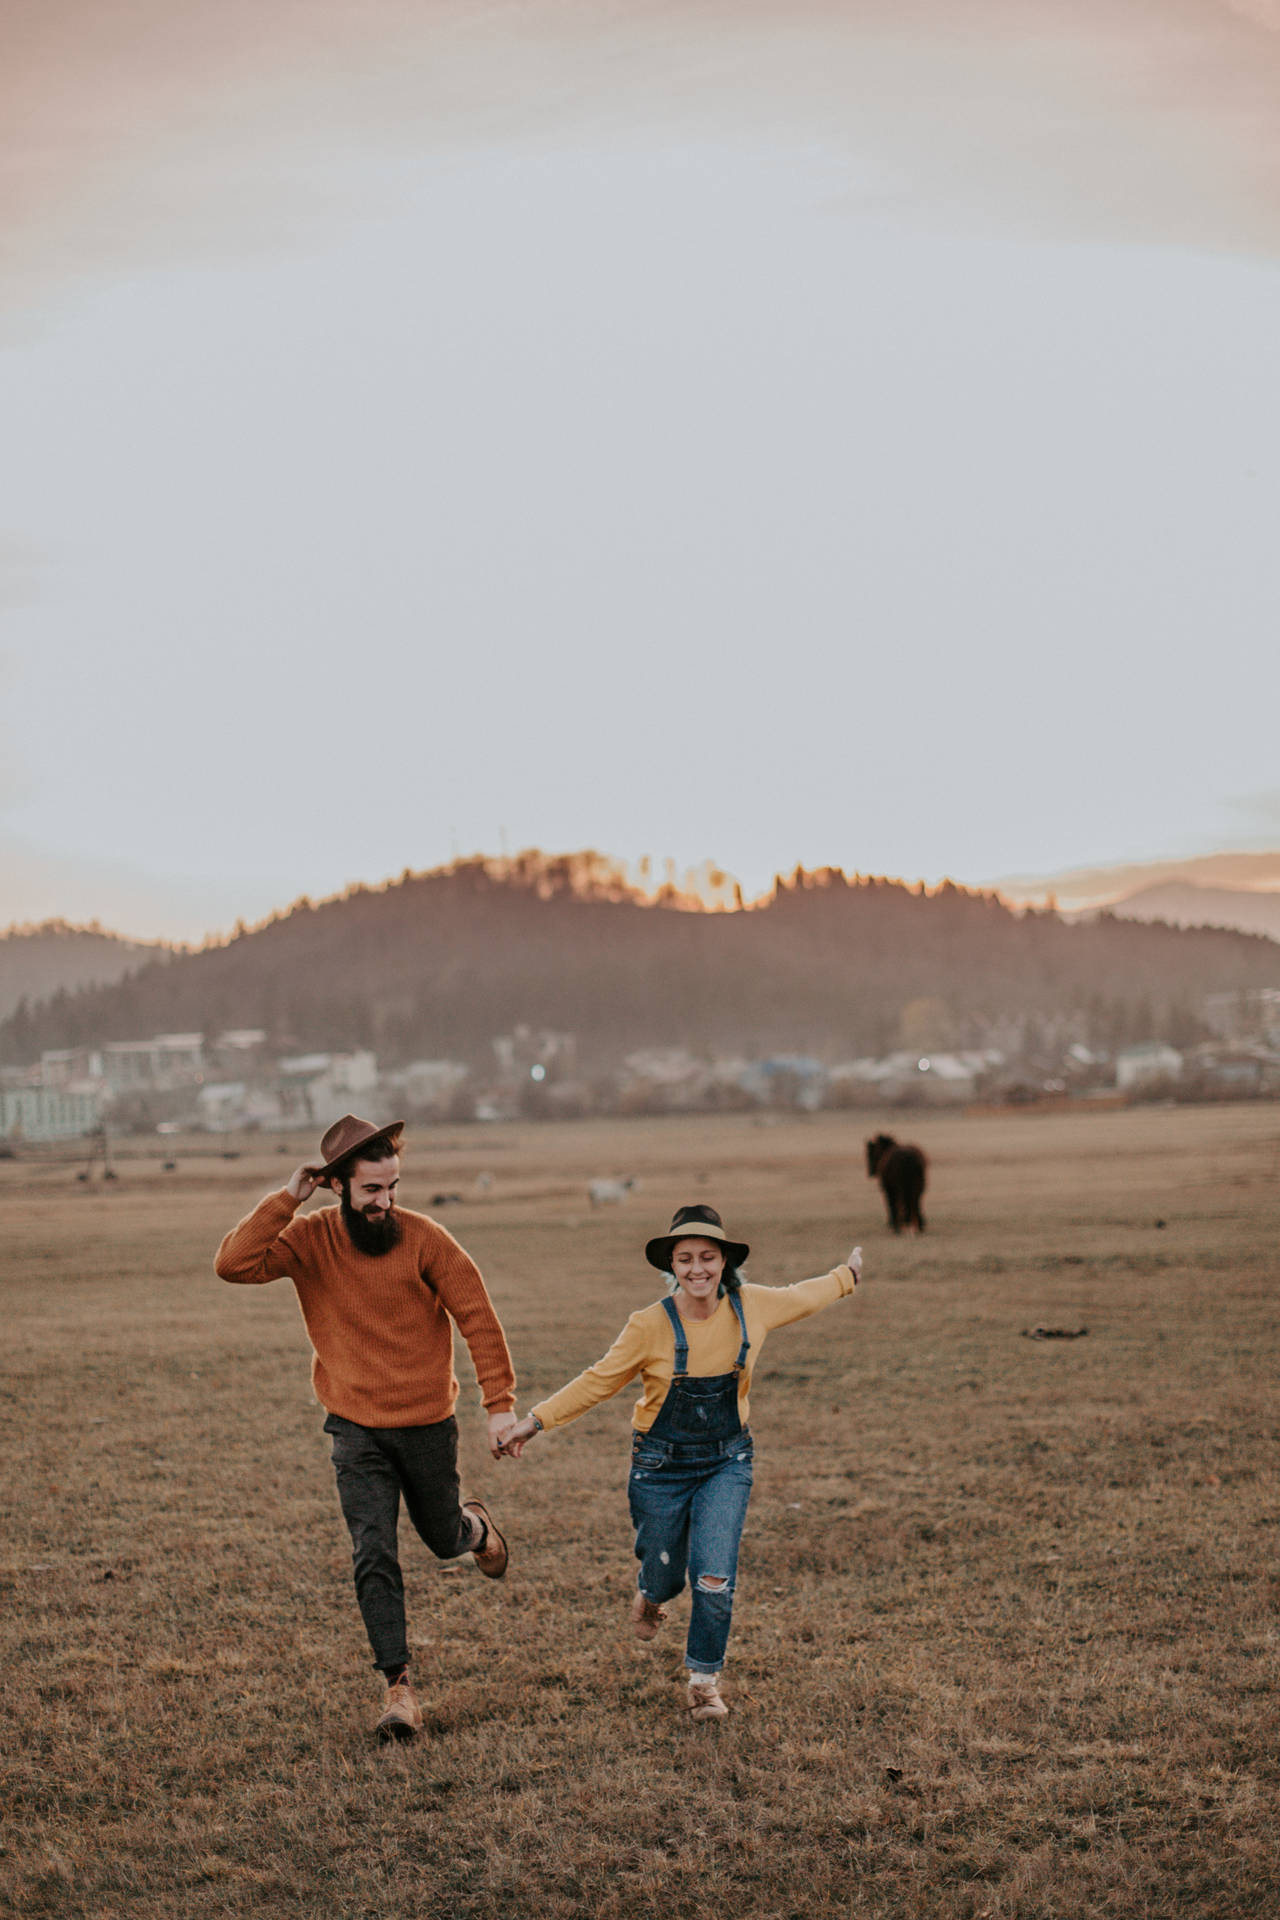 Couple In Cowboy Costume